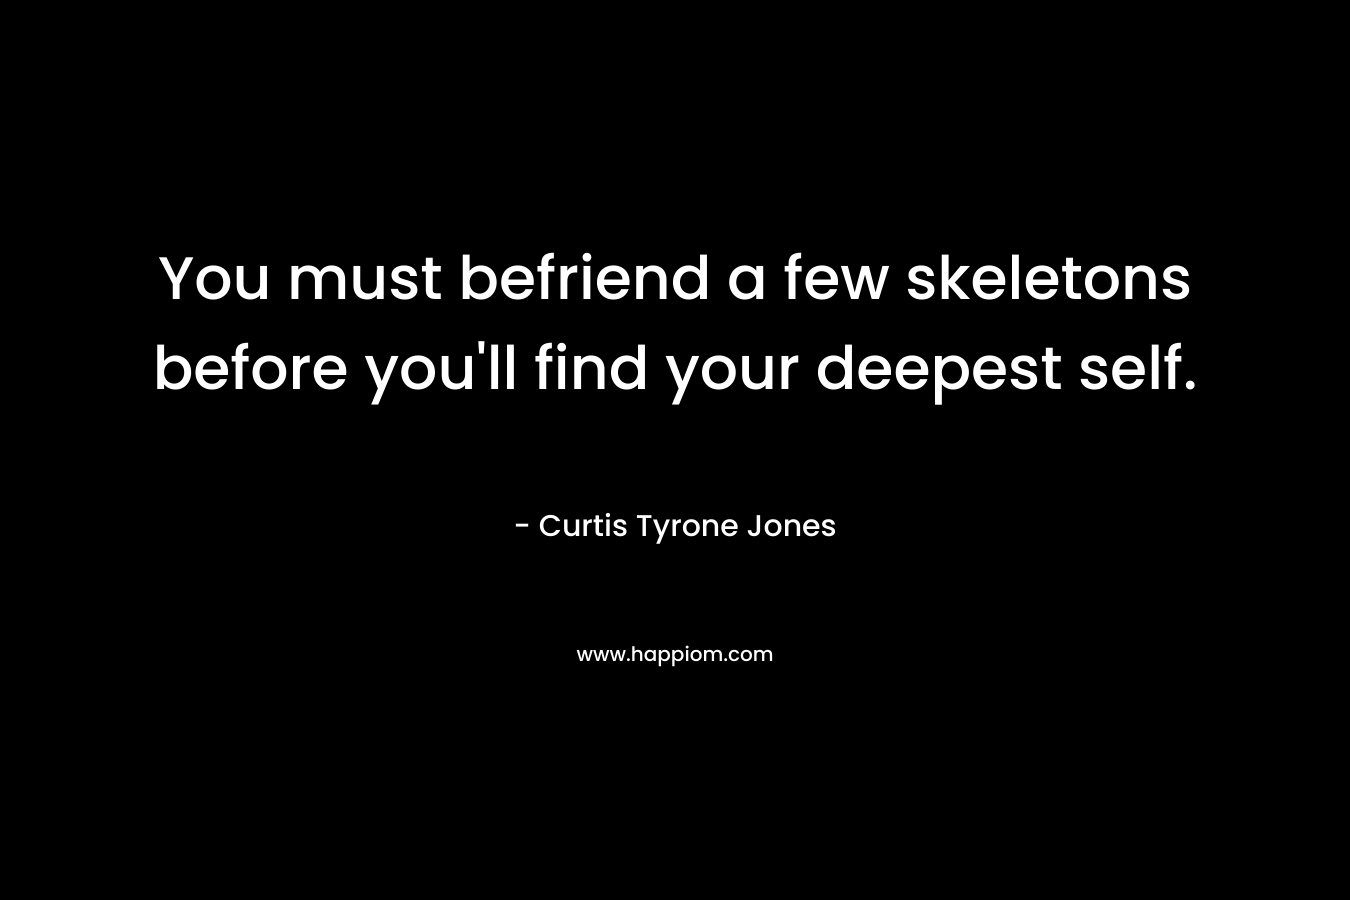 You must befriend a few skeletons before you’ll find your deepest self. – Curtis Tyrone Jones